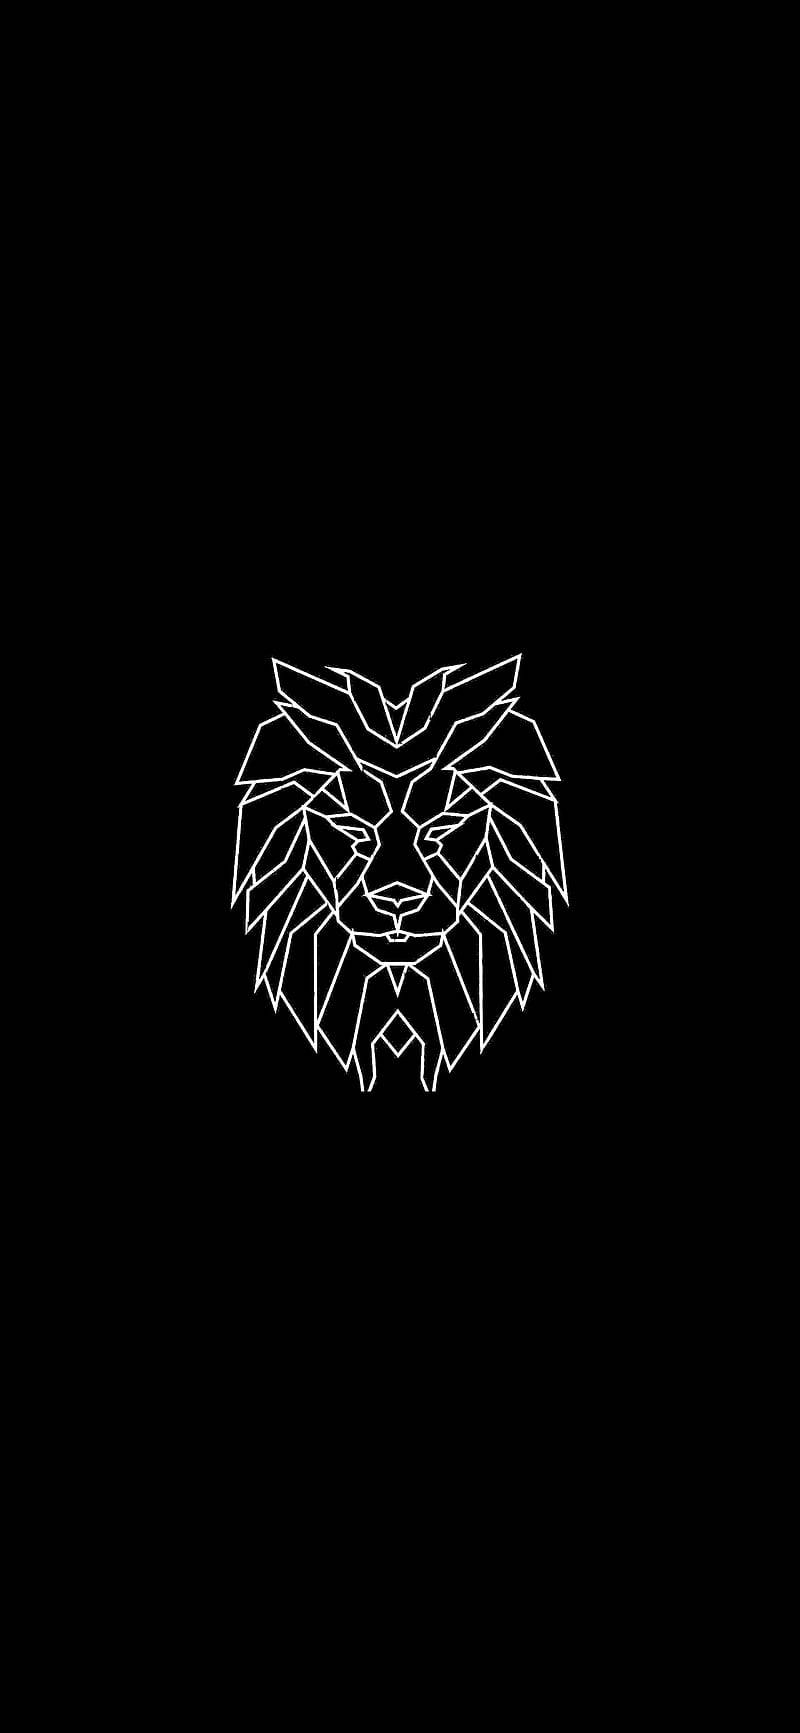 500+ The Black Lion Pictures [HD] | Download Free Images on Unsplash